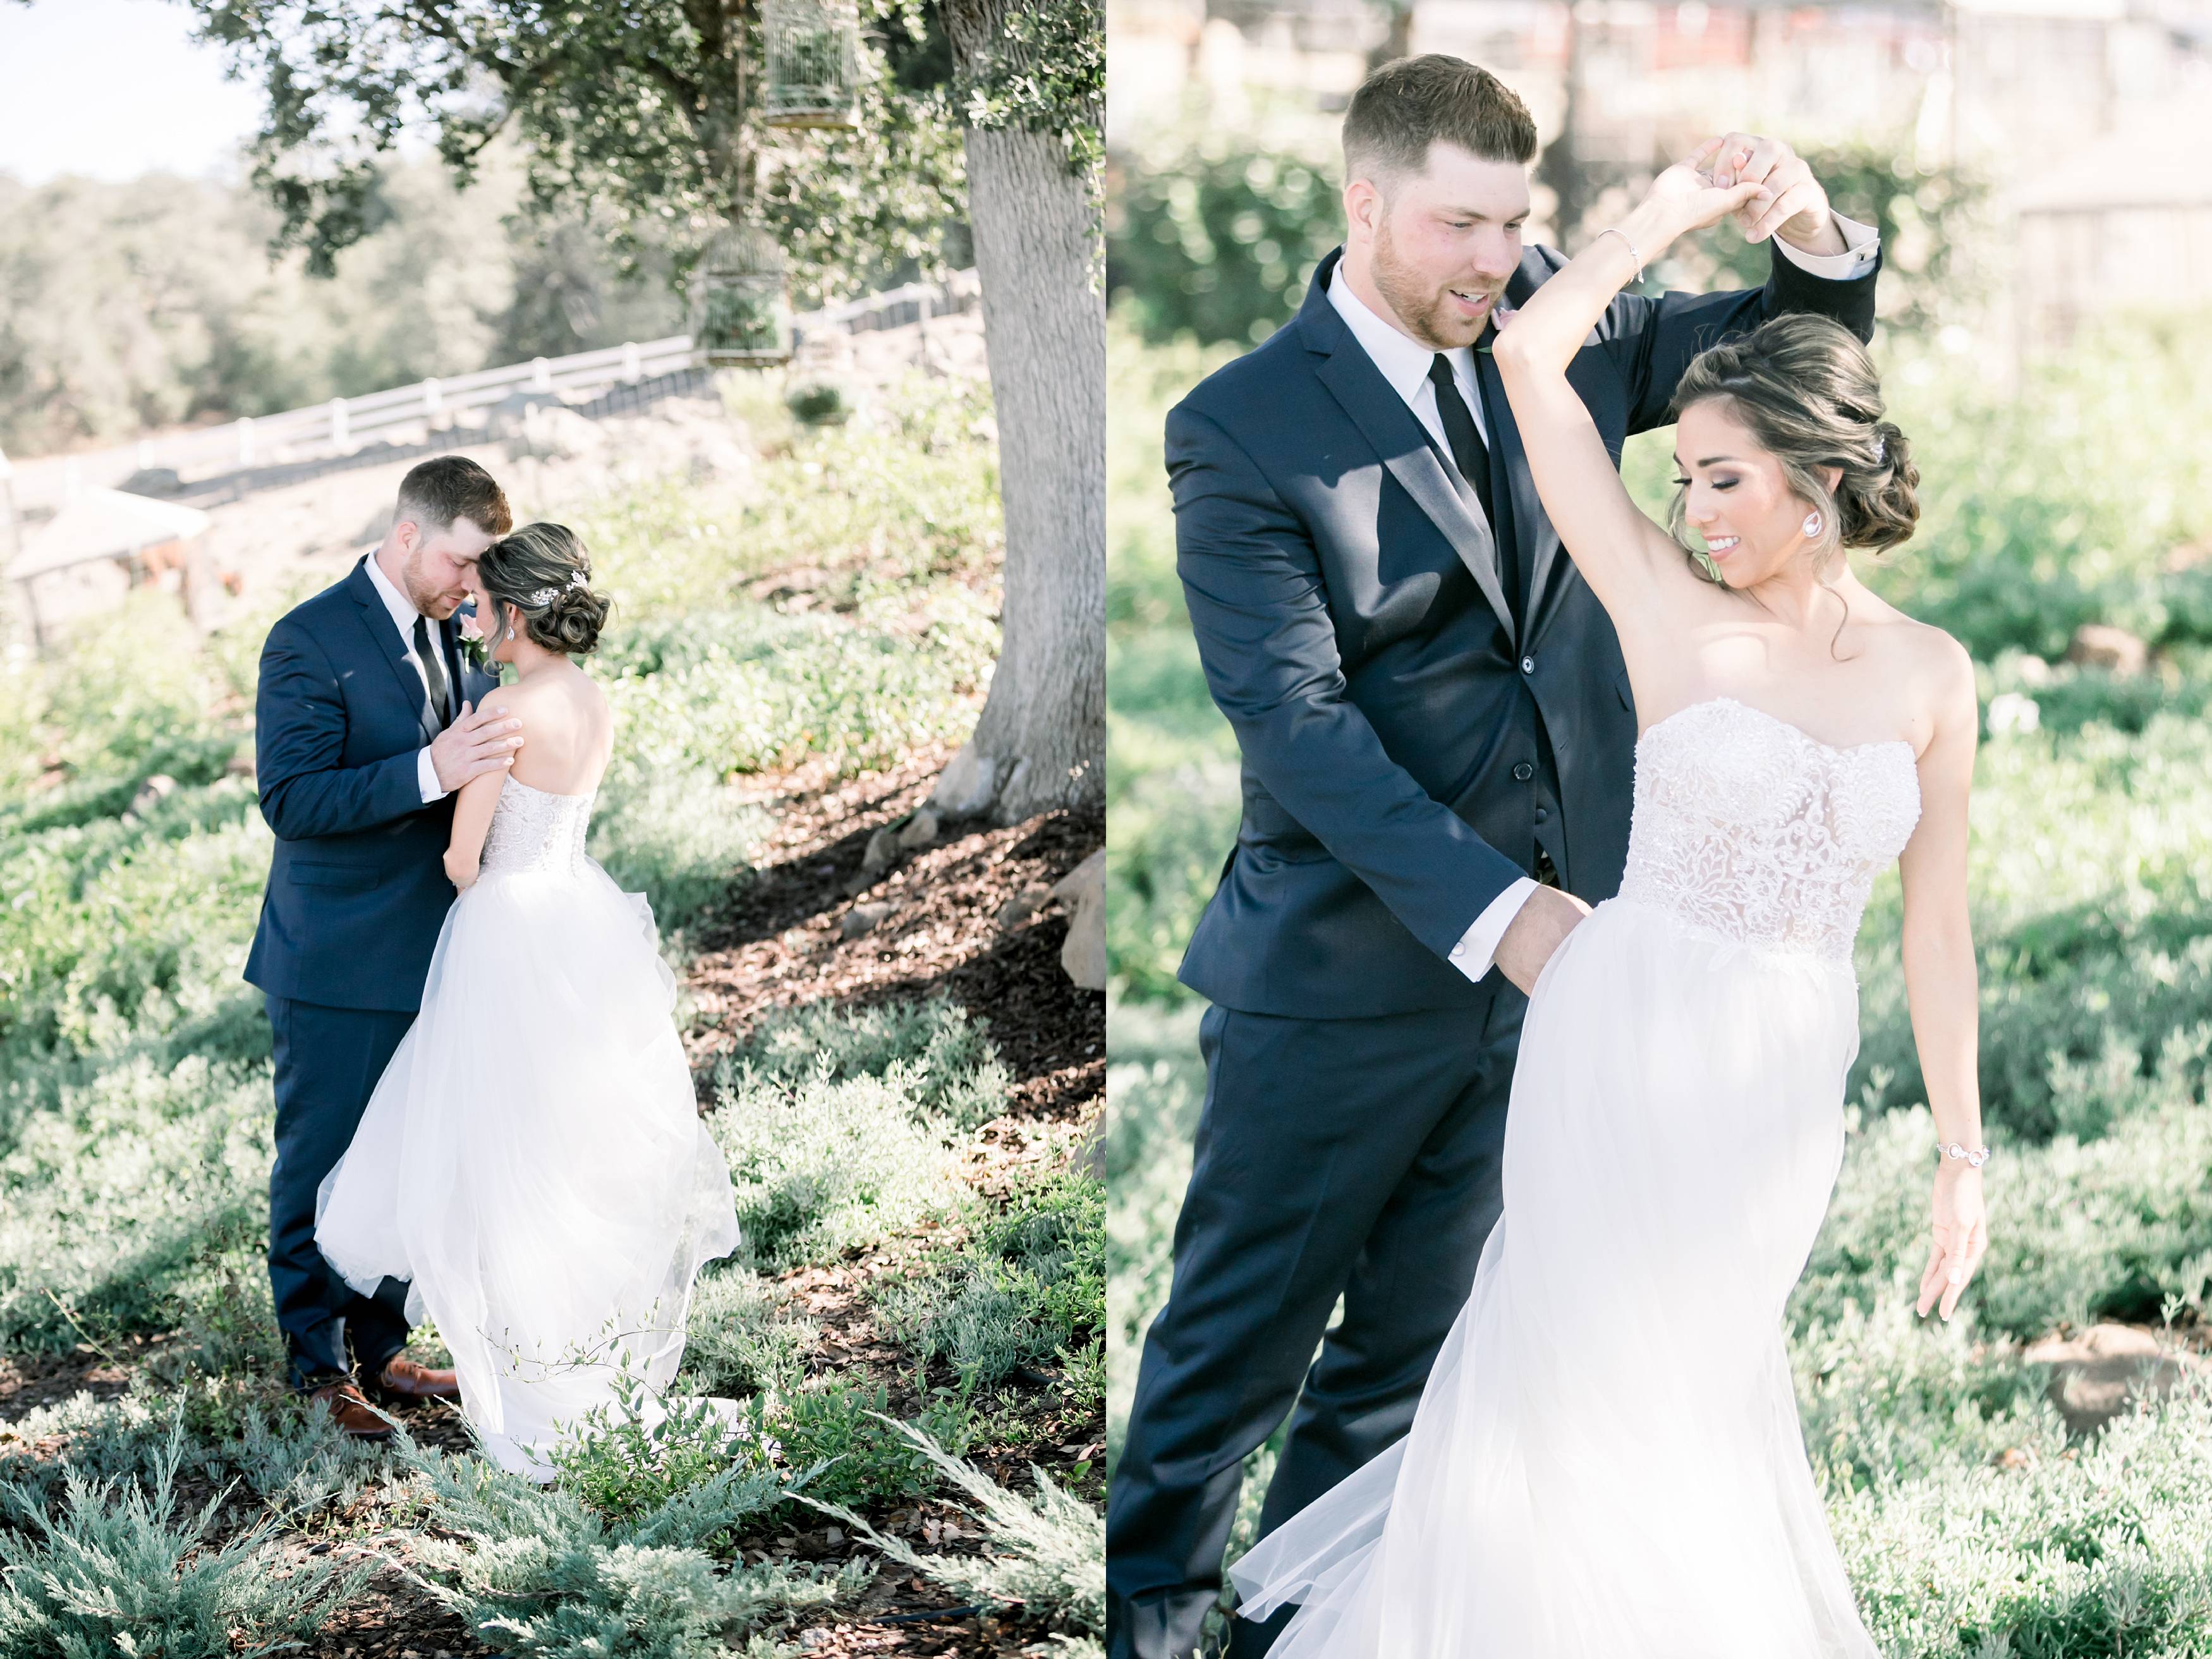 Bride and groom dancing in the garden at Forever and Always Farm wedding venue in Temecula California